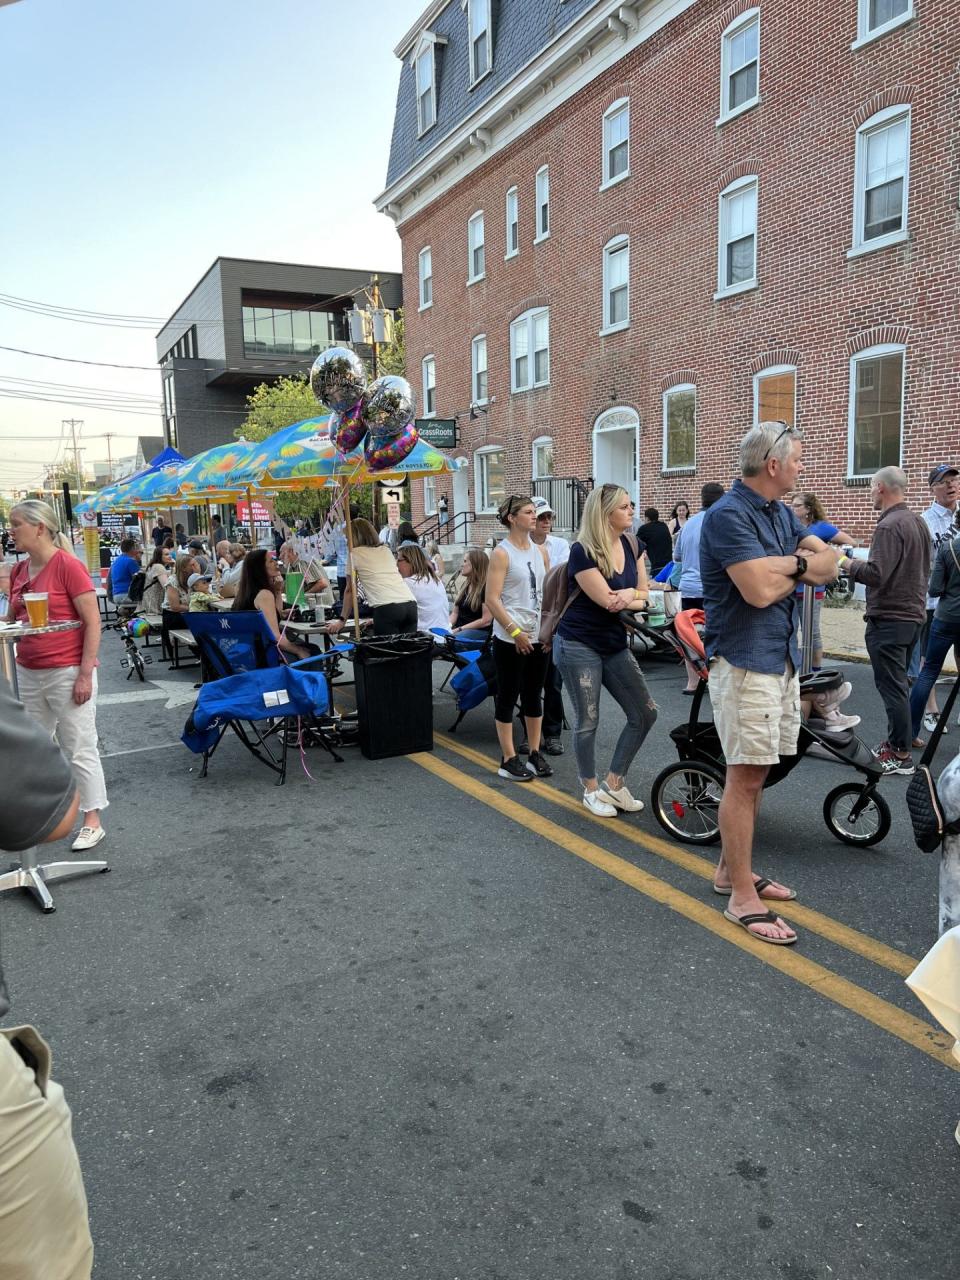 Locals came out to a beer garden event on Academy Street earlier this summer, hosted by Hamilton's on Main.